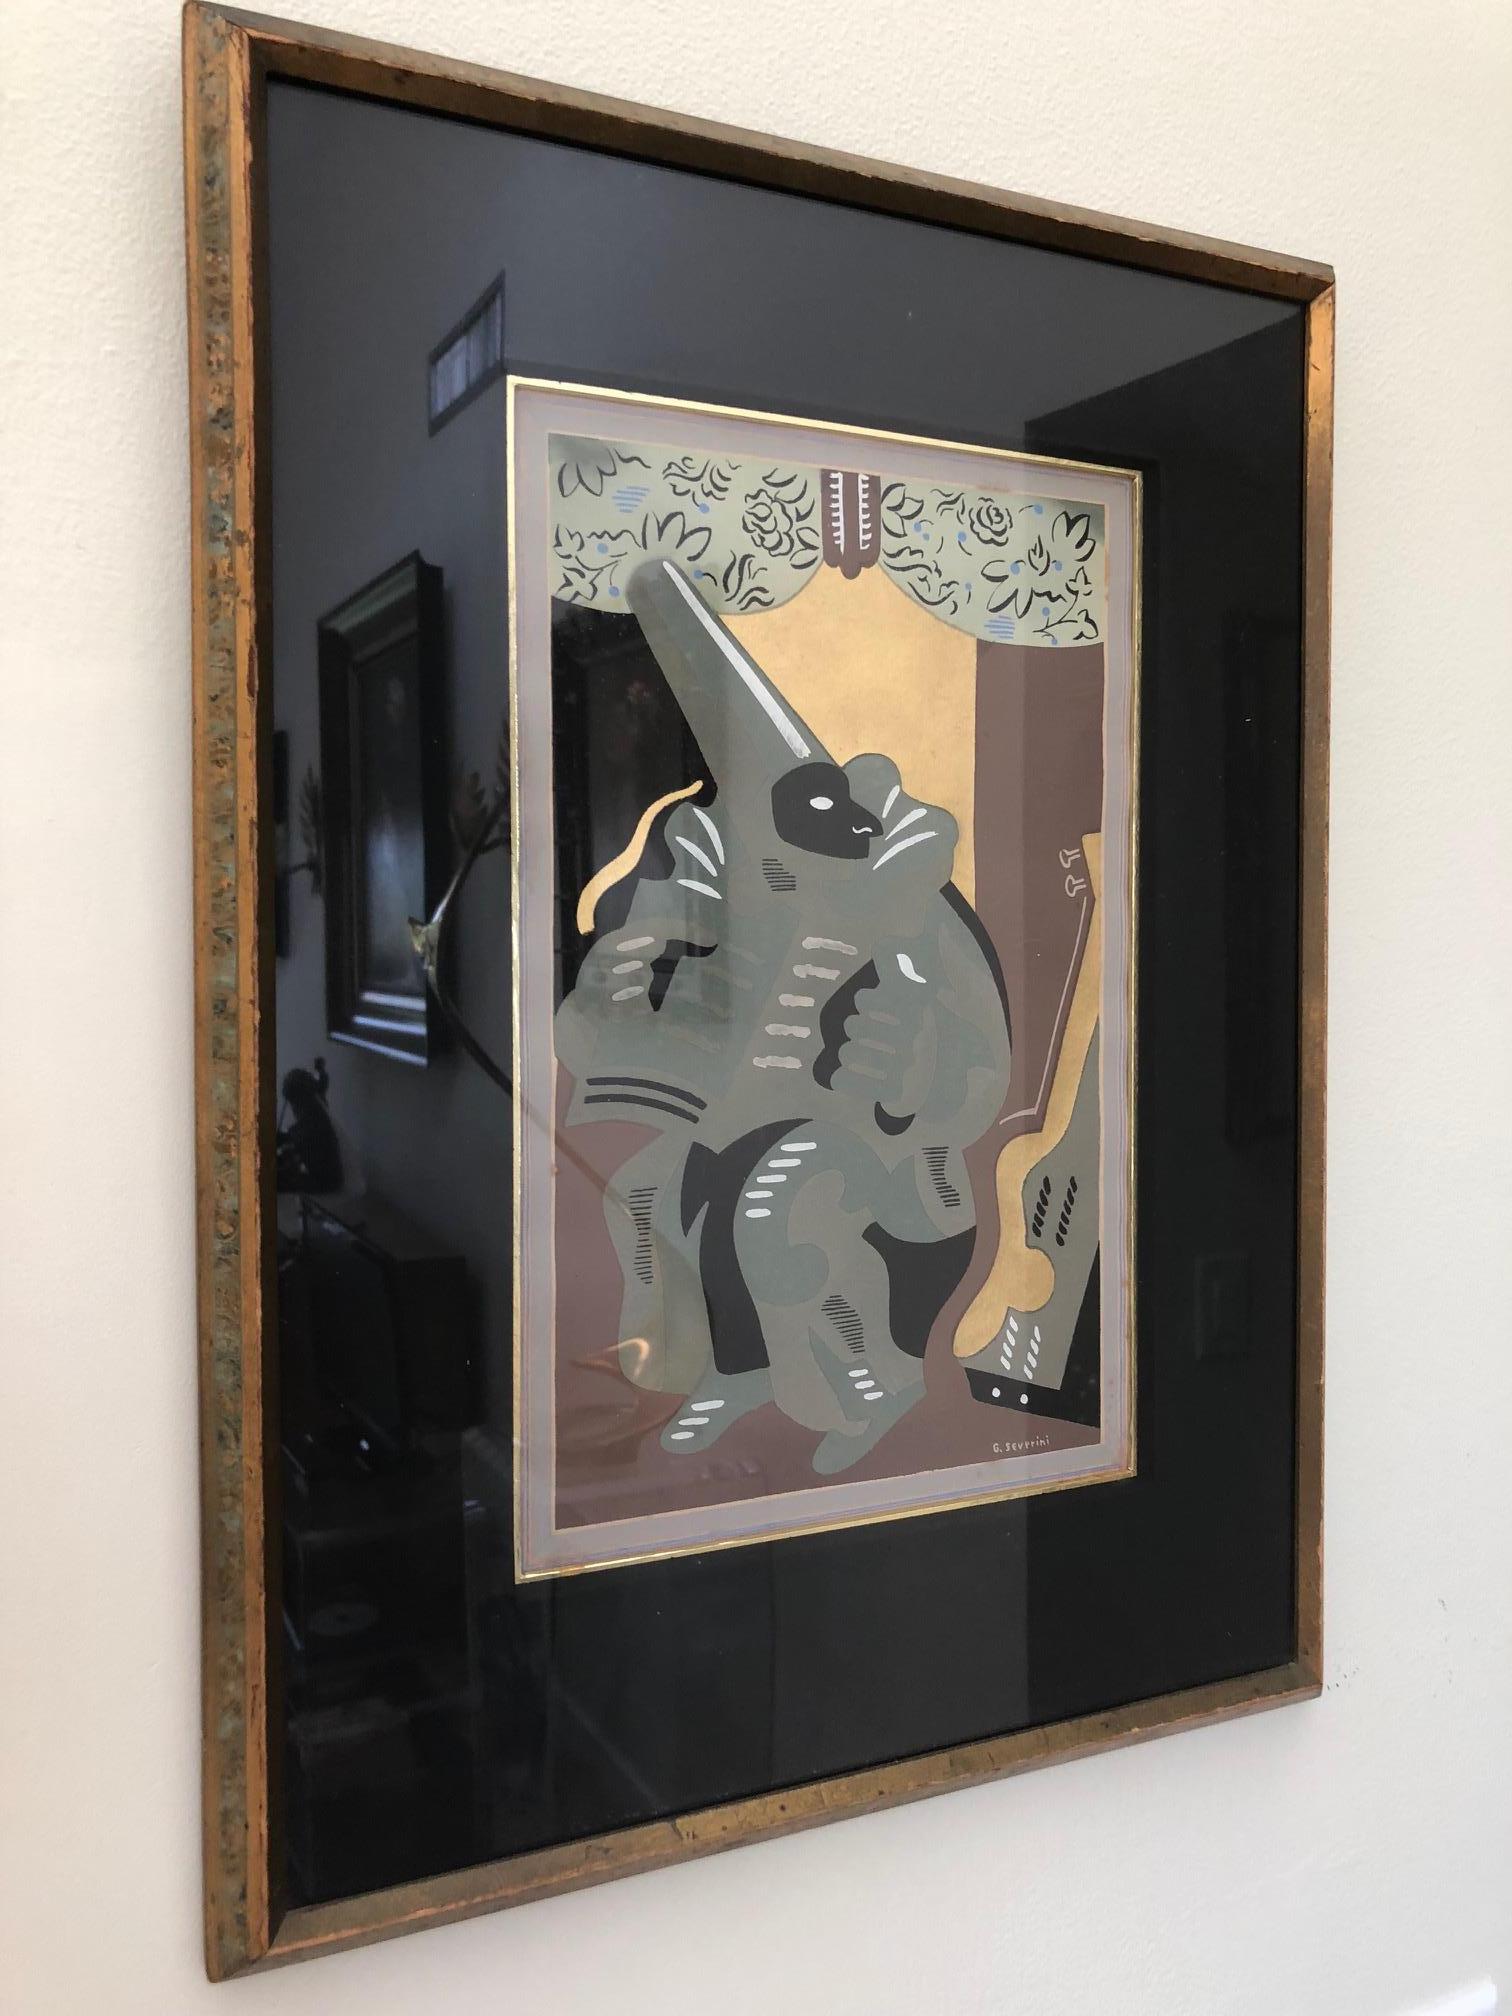 This rare pochoir by Gino Severini is titled 